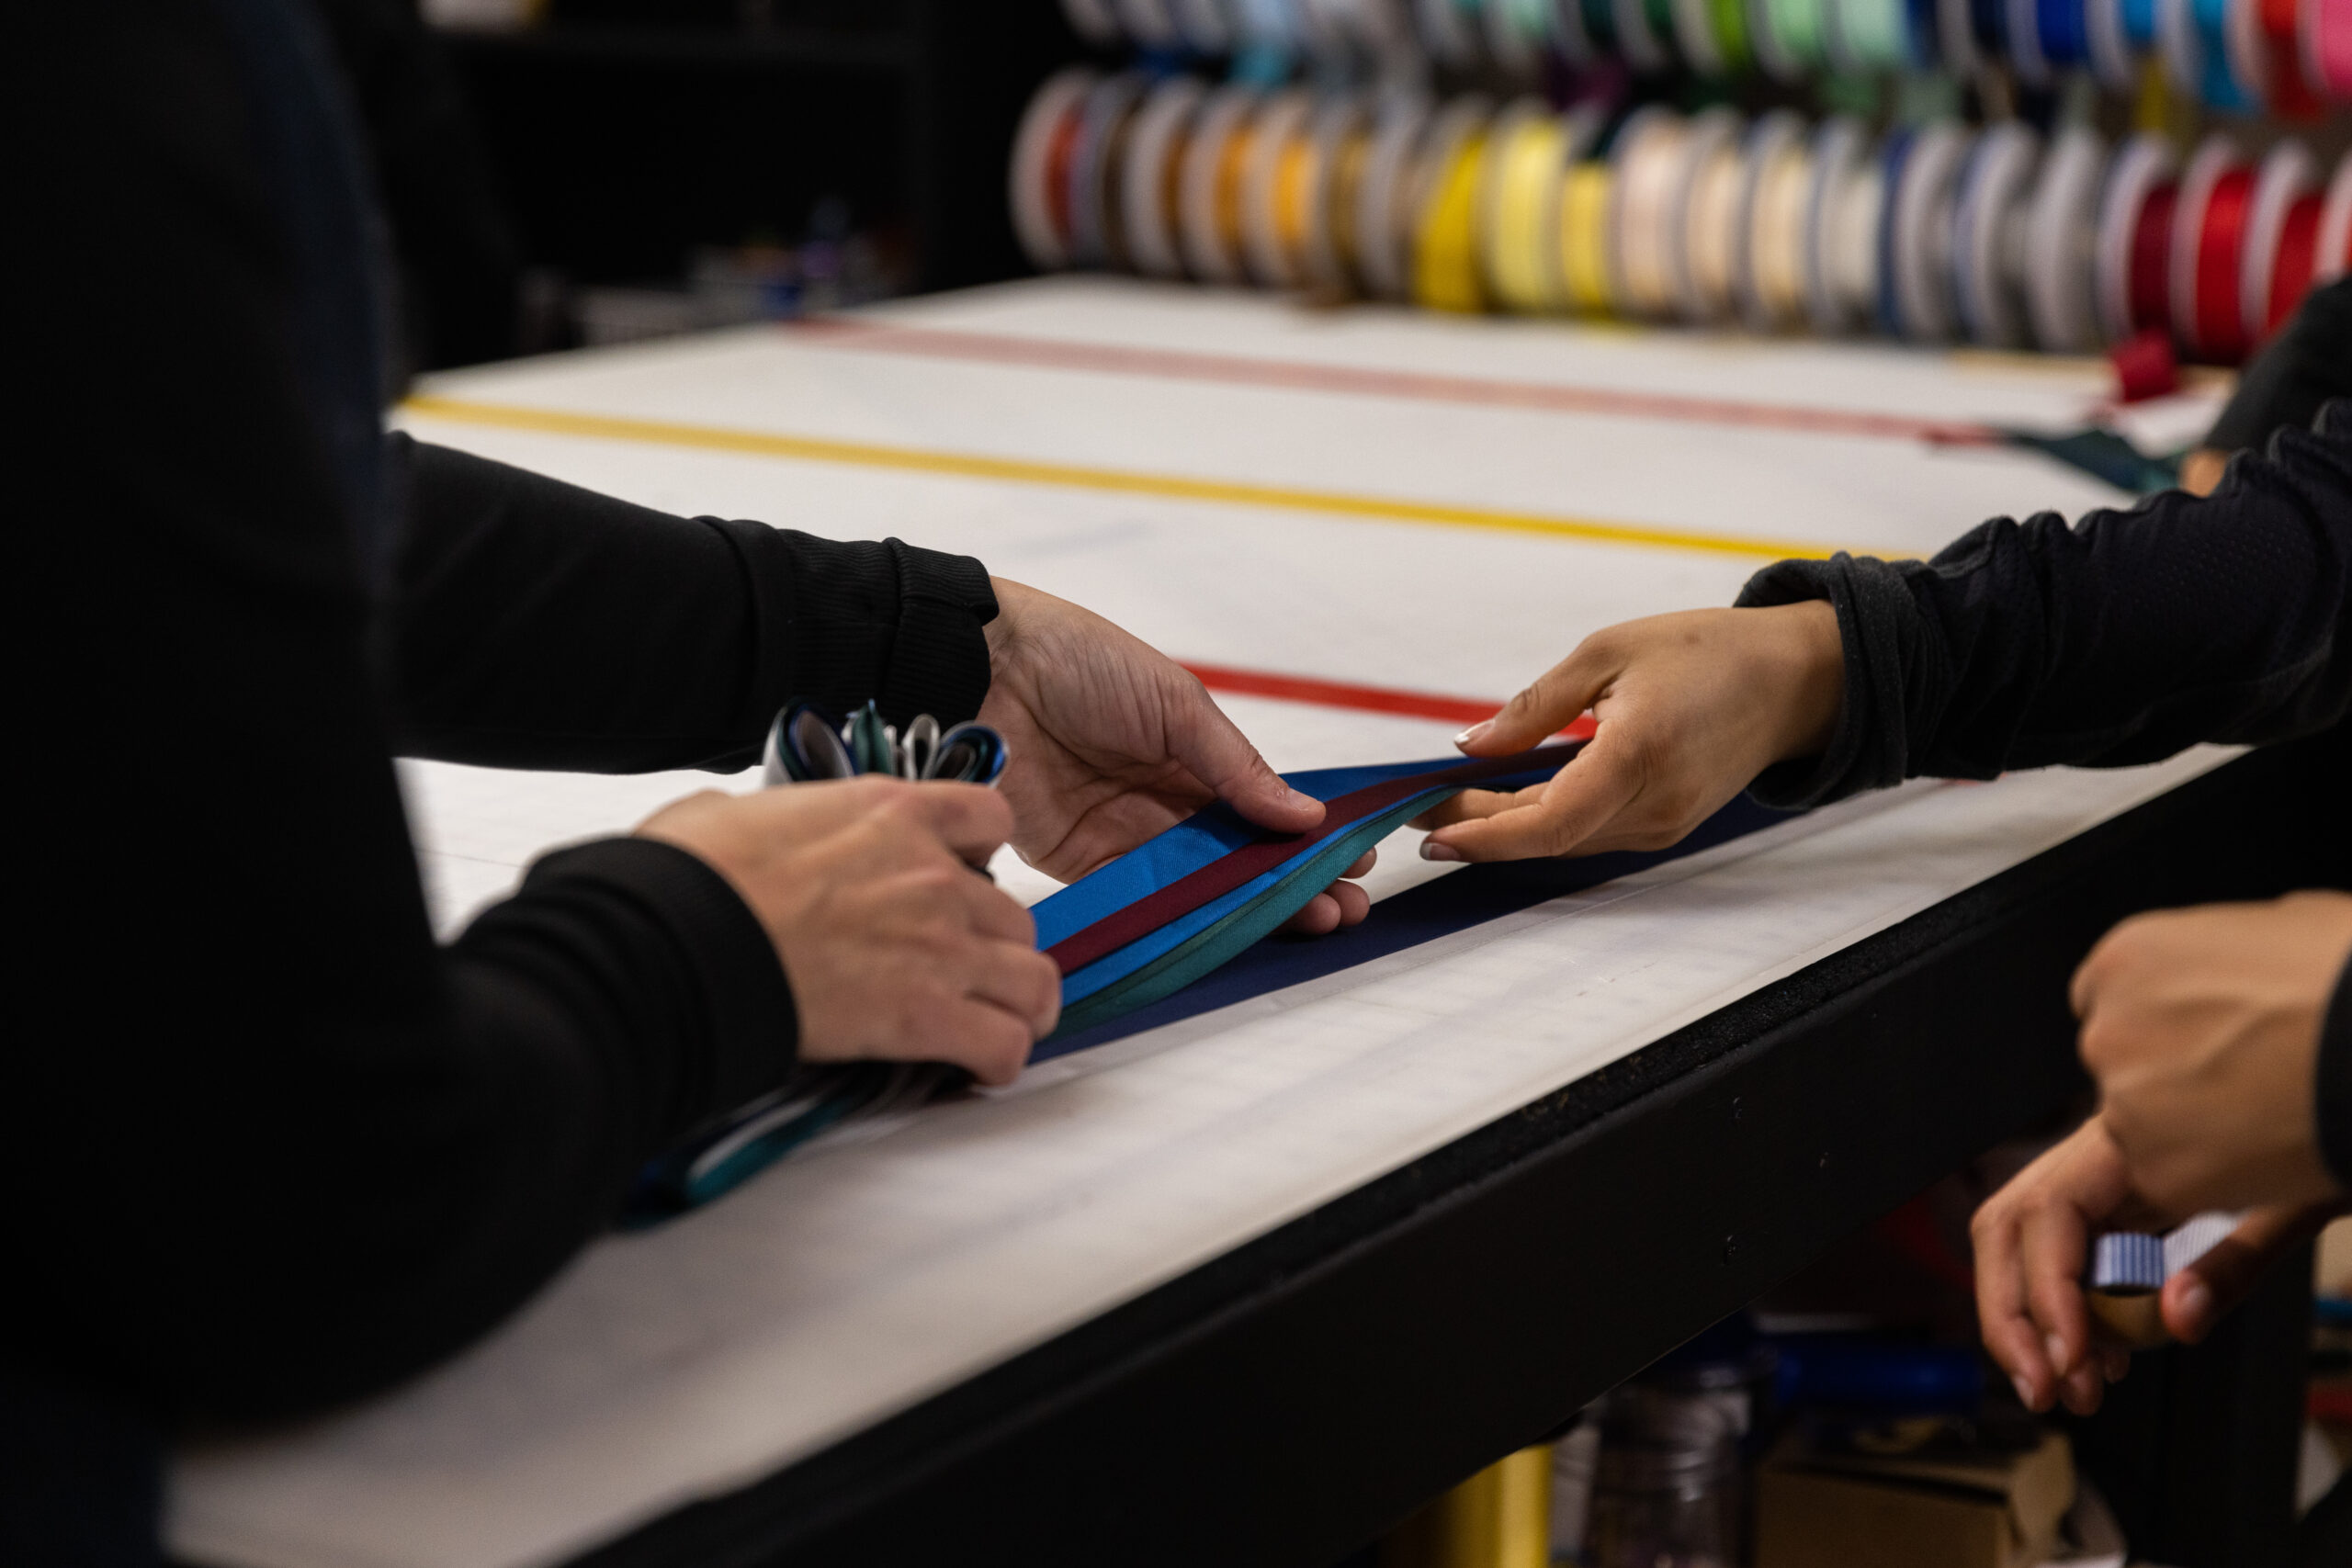 A person folds a collection of ribbons, in hues of blues, greens and deep red, on top of a cutting table. Their hands are in focus in the photo as another set of hands helps them with the task. There are a set of ribbon spools far in the background.